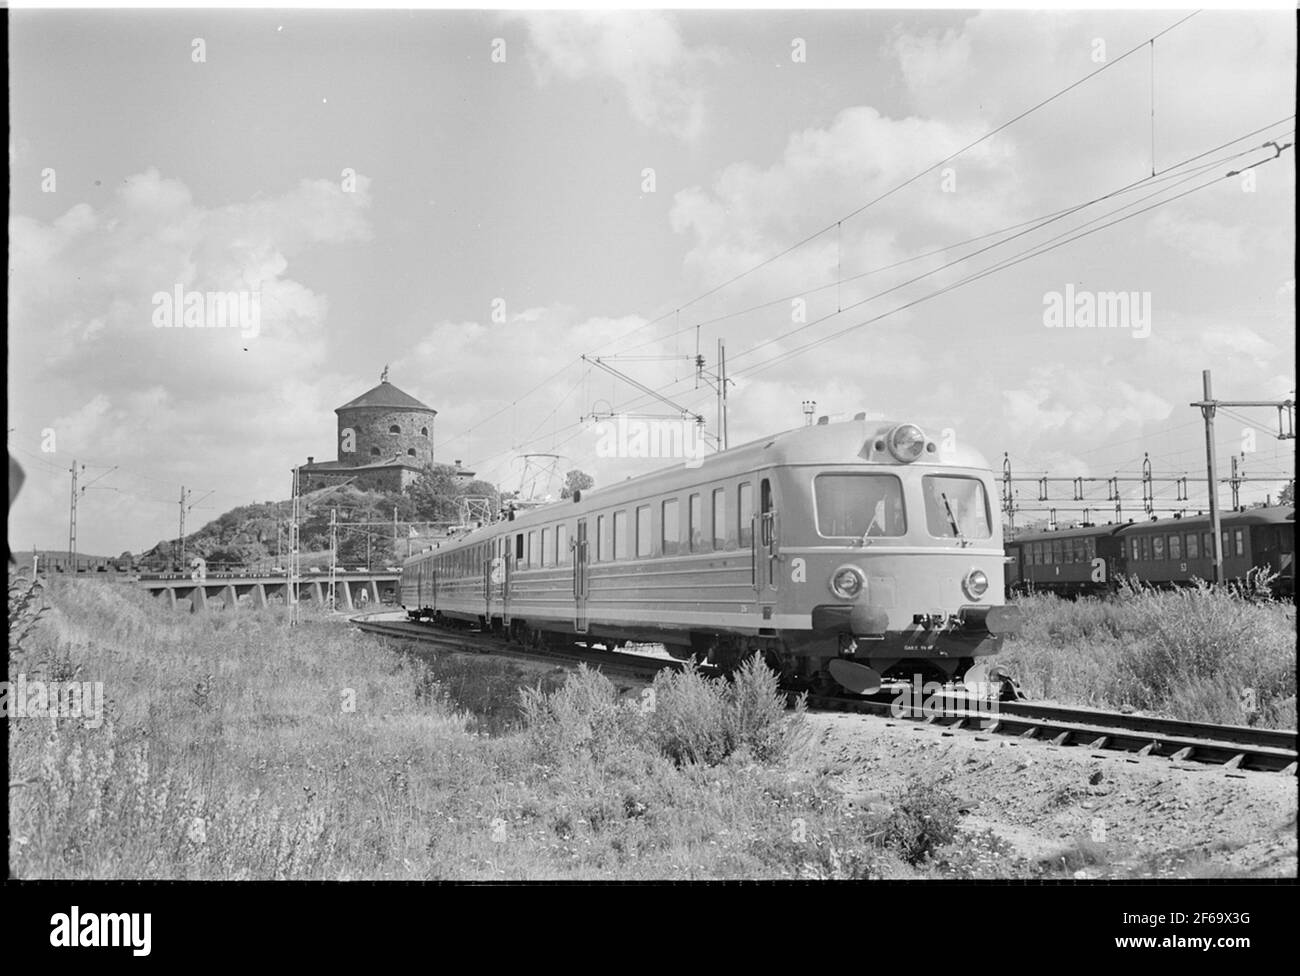 National railways, SJ XOA5 and SJ Creditor in Gothenburg. Skansen The lion is visible in the background. Stock Photo